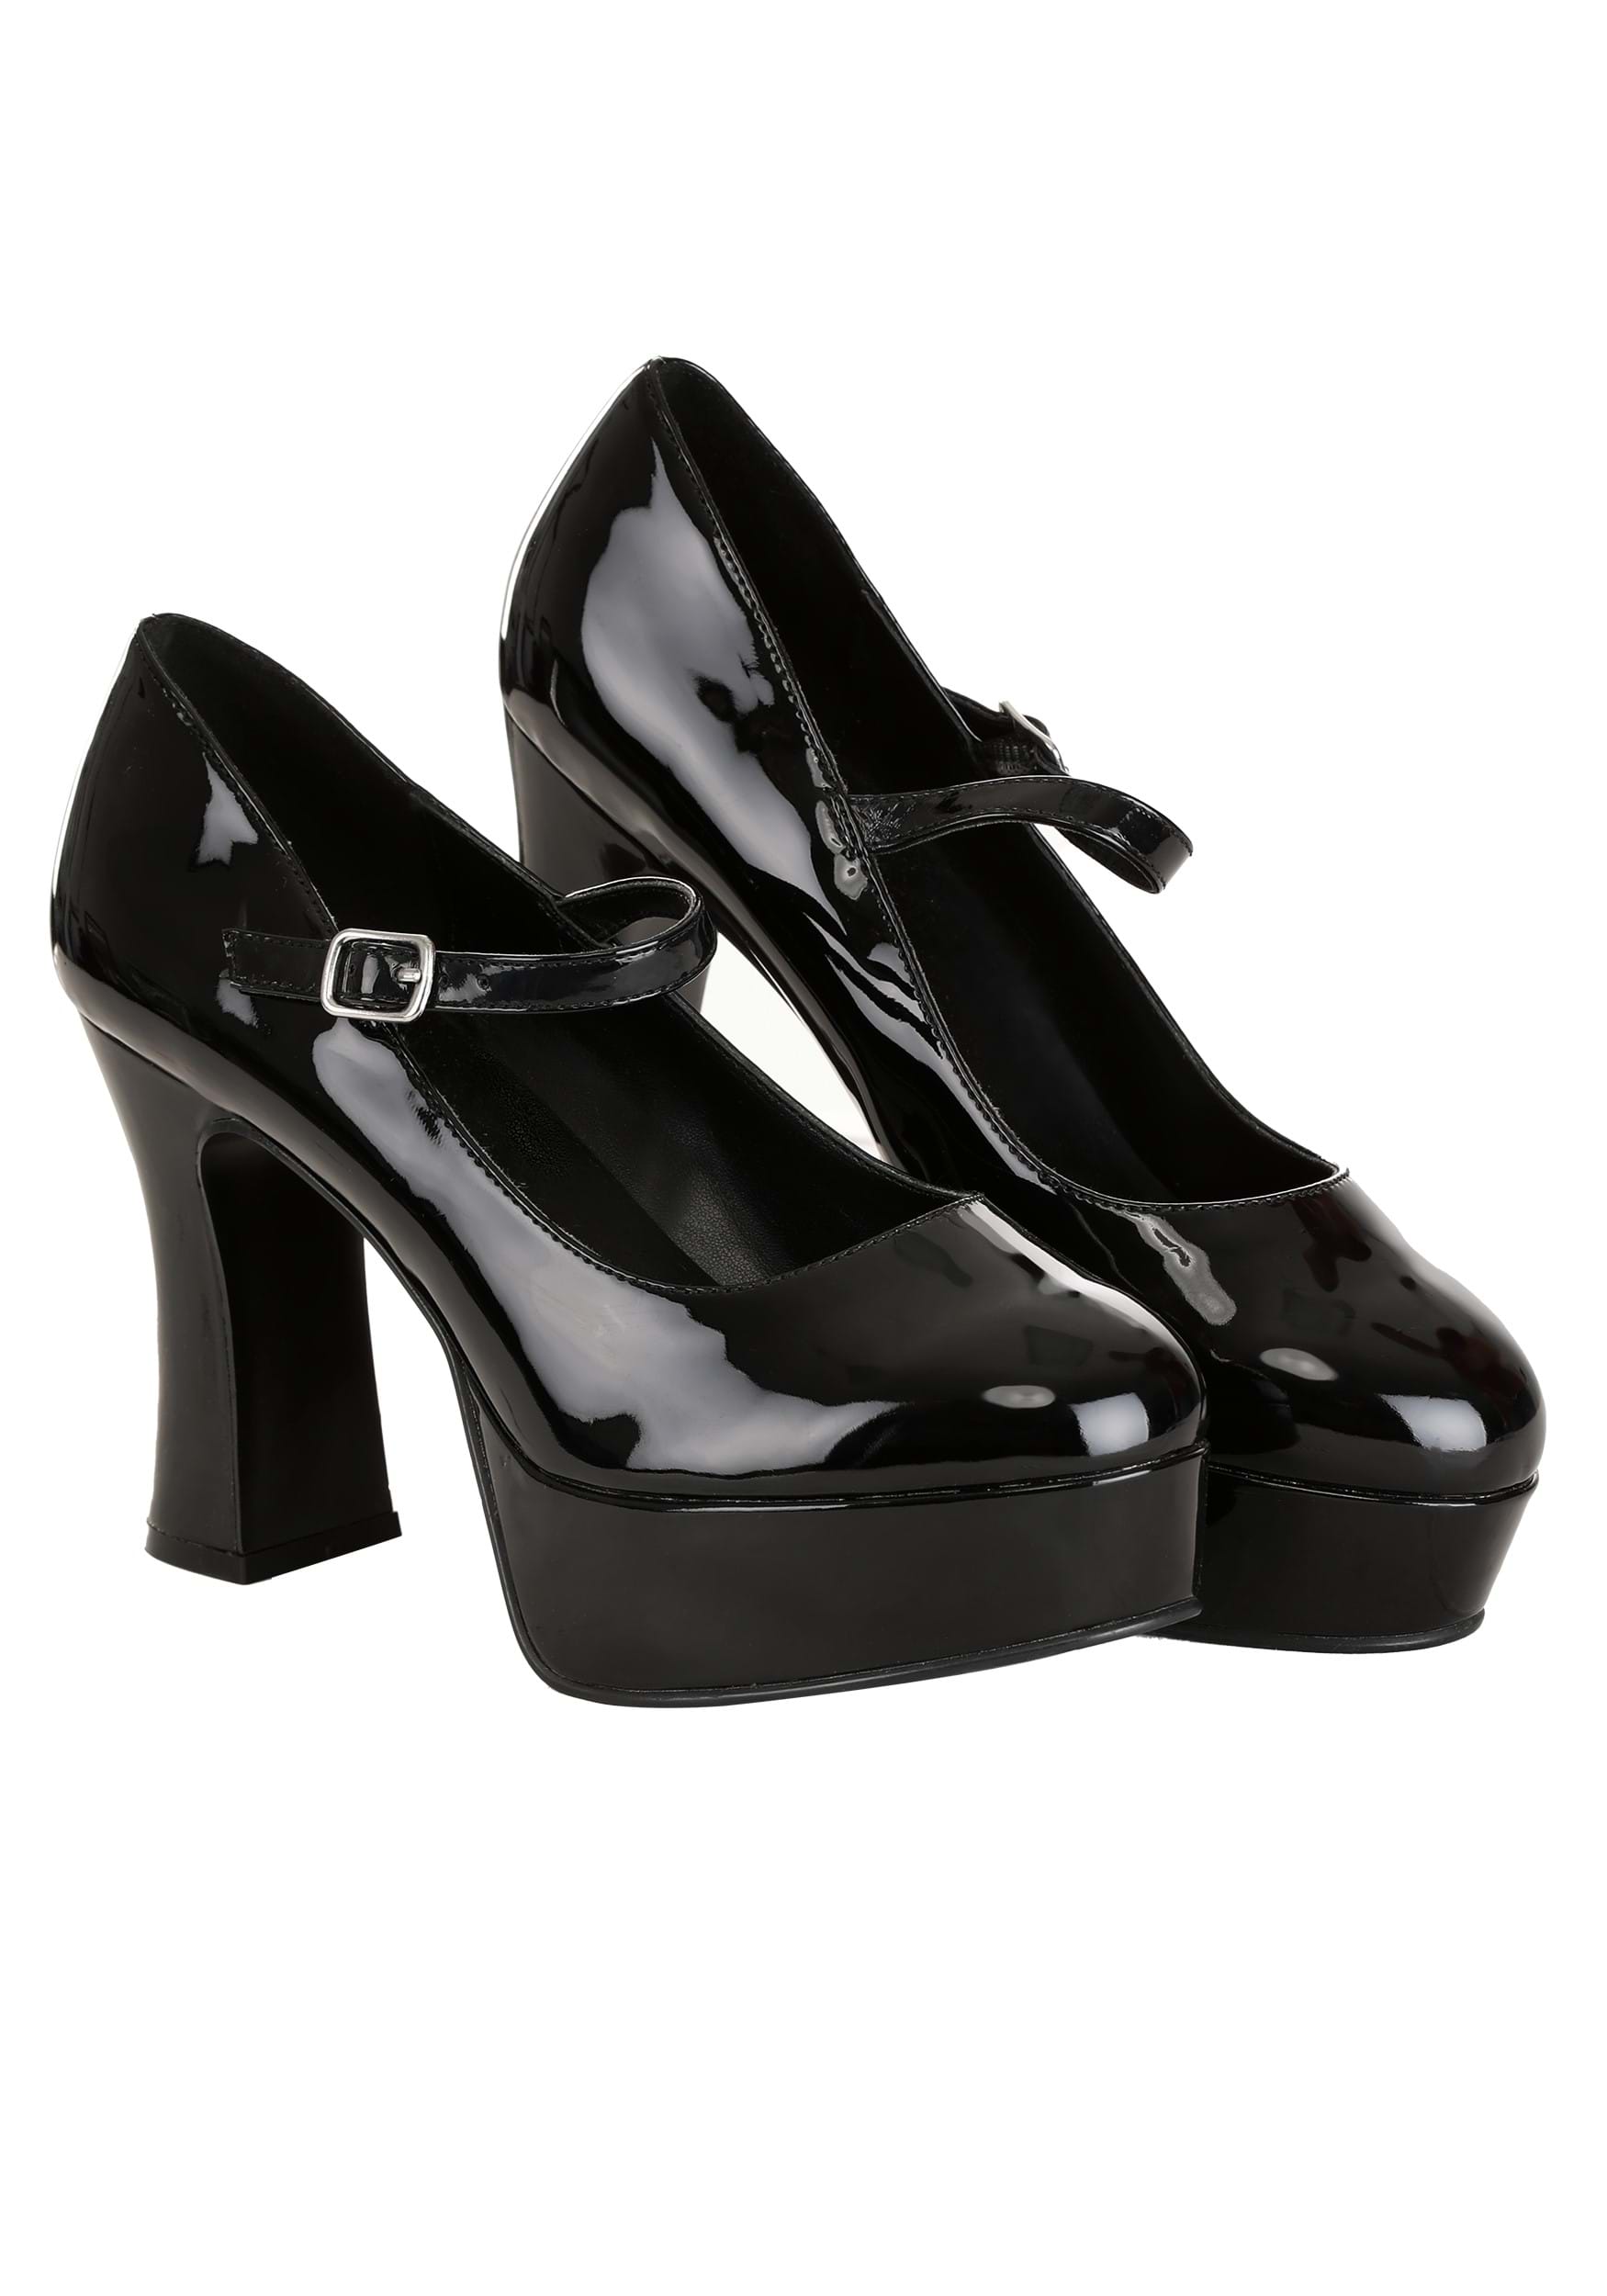 Share more than 133 patent leather mary jane heels best - esthdonghoadian